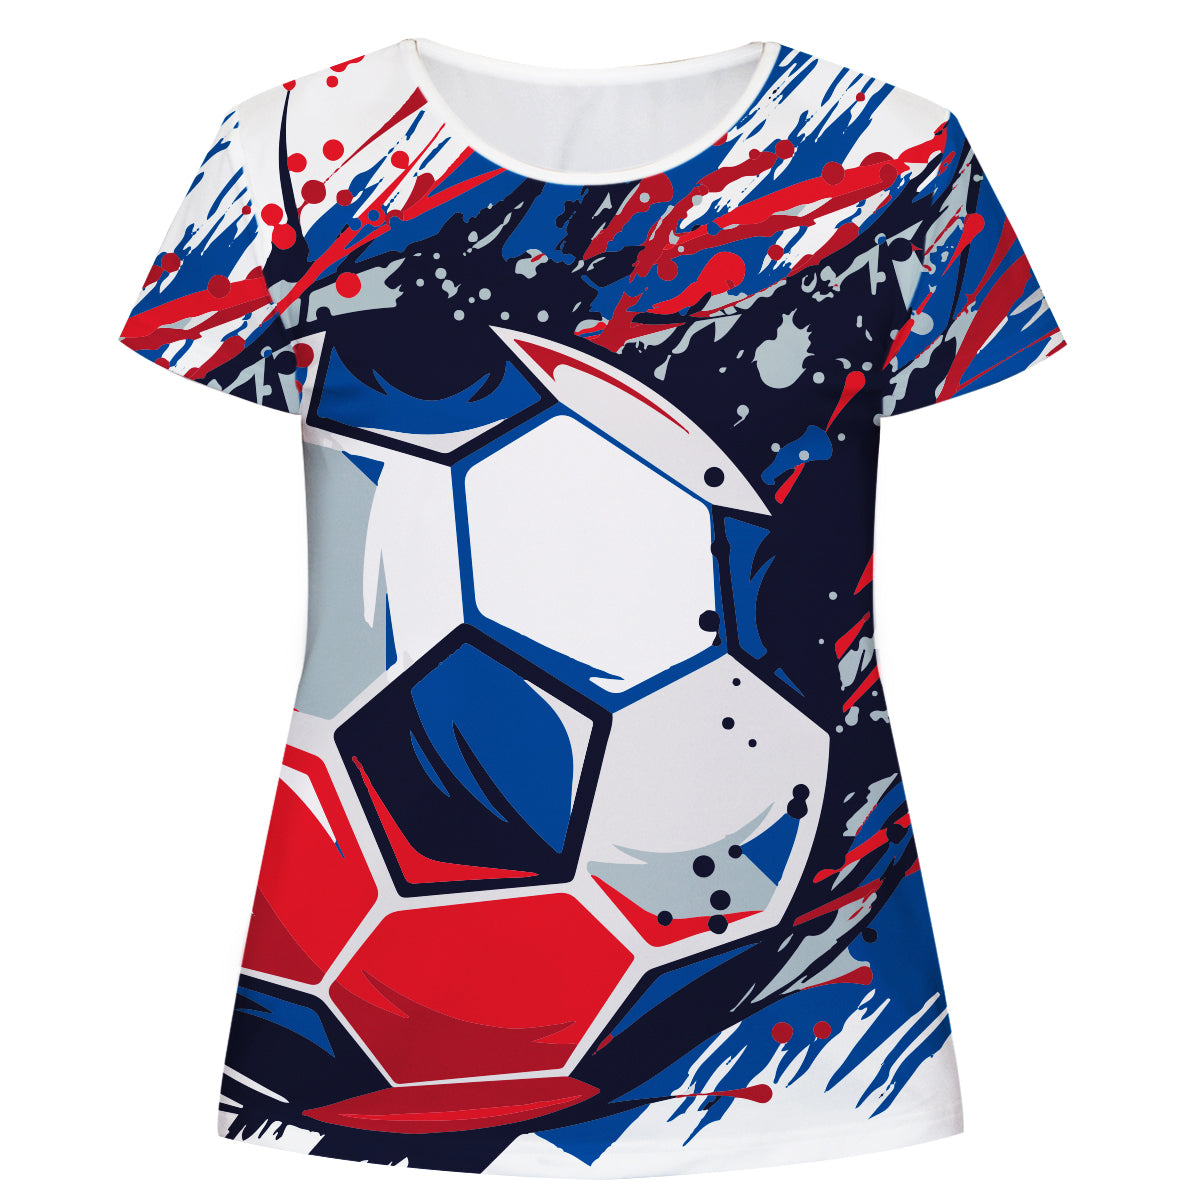 Soccer Ball White Blue and Red Short Sleeve Tee Shirt